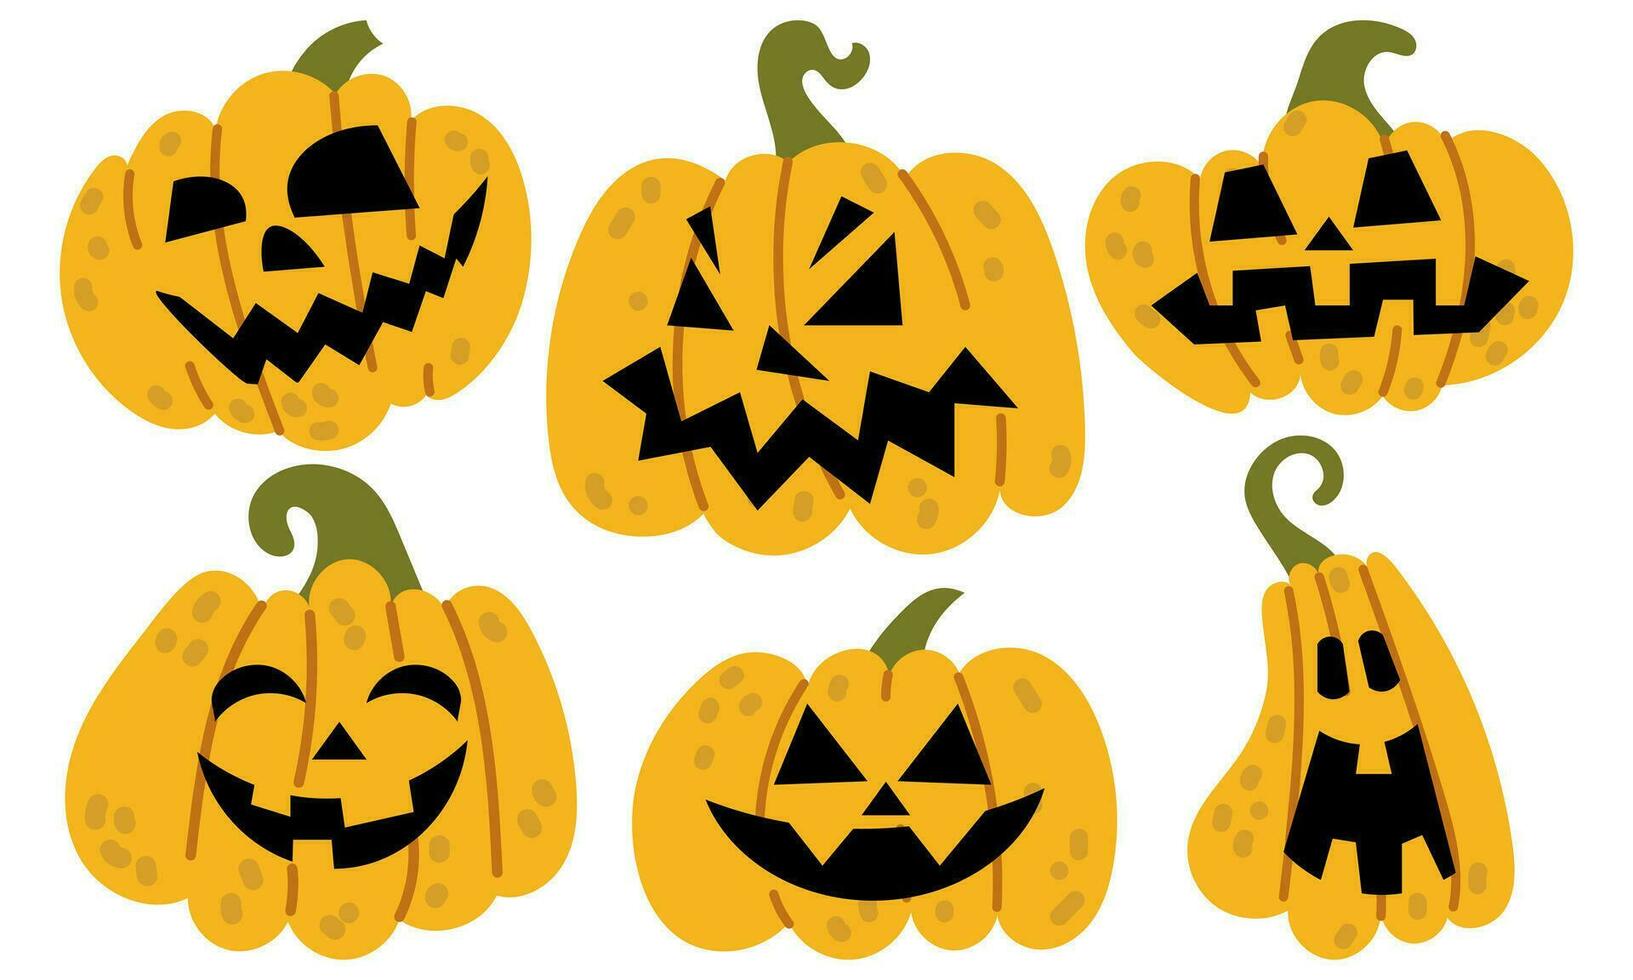 A set of scary pumpkins for Halloween. Flat style vector yellow creepy pumpkins with black carved faces on a white background. A bright isolated illustration of pumpkins with emotions. Sticker